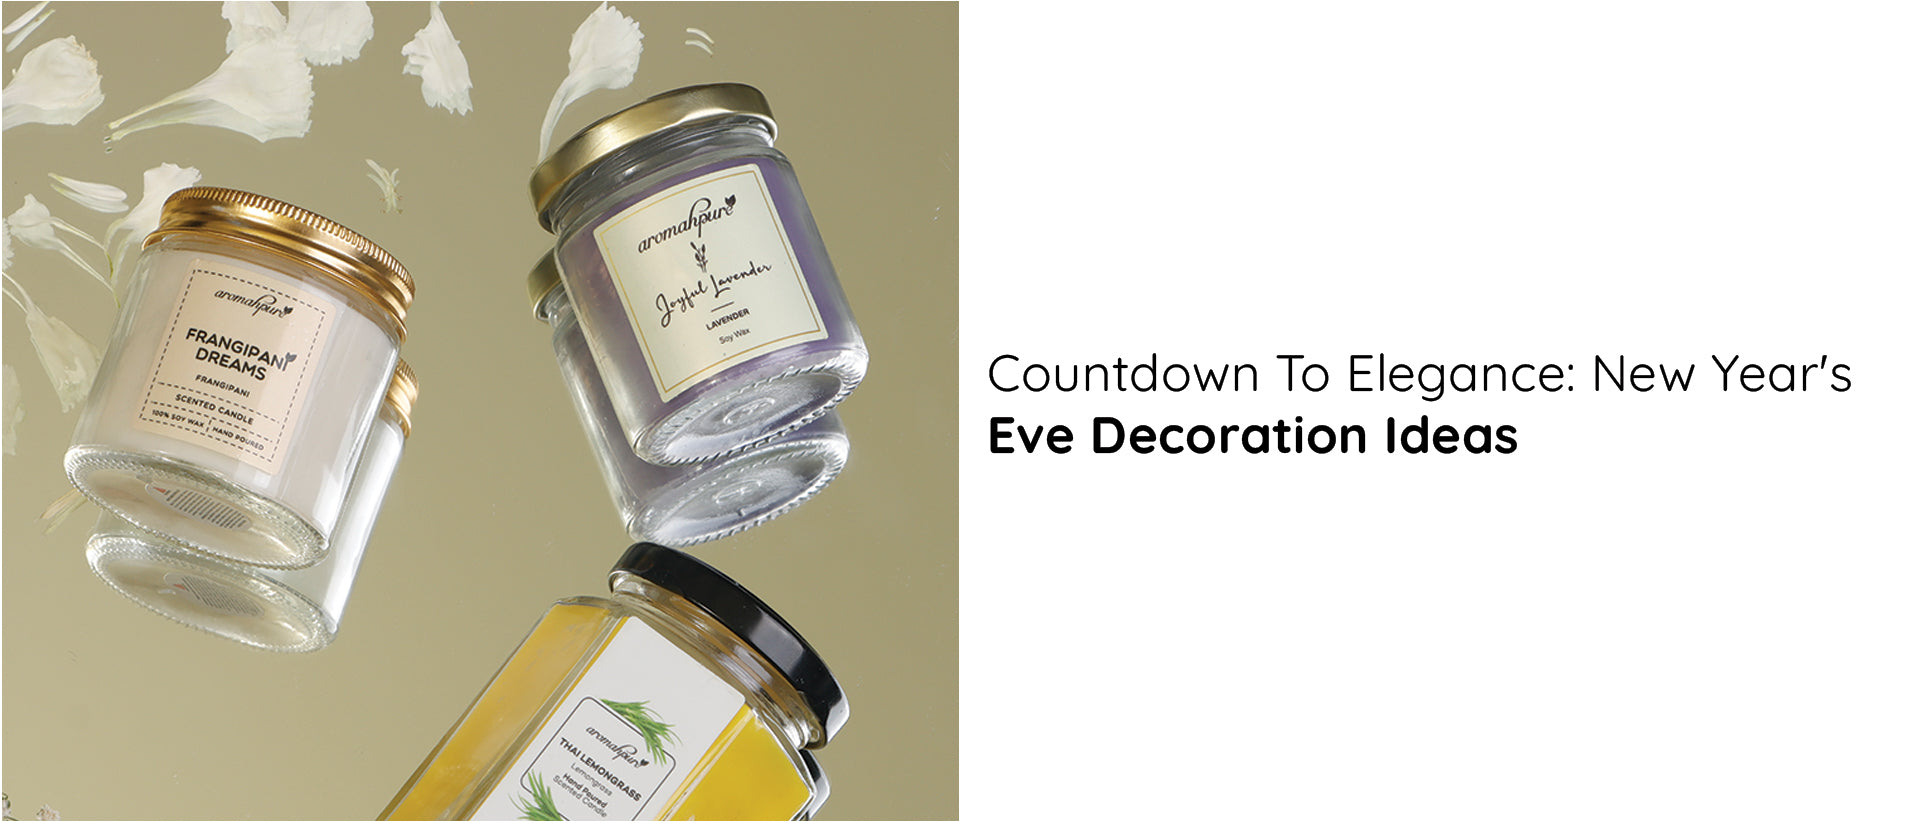 Countdown To Elegance: New Year's Eve Decoration Ideas